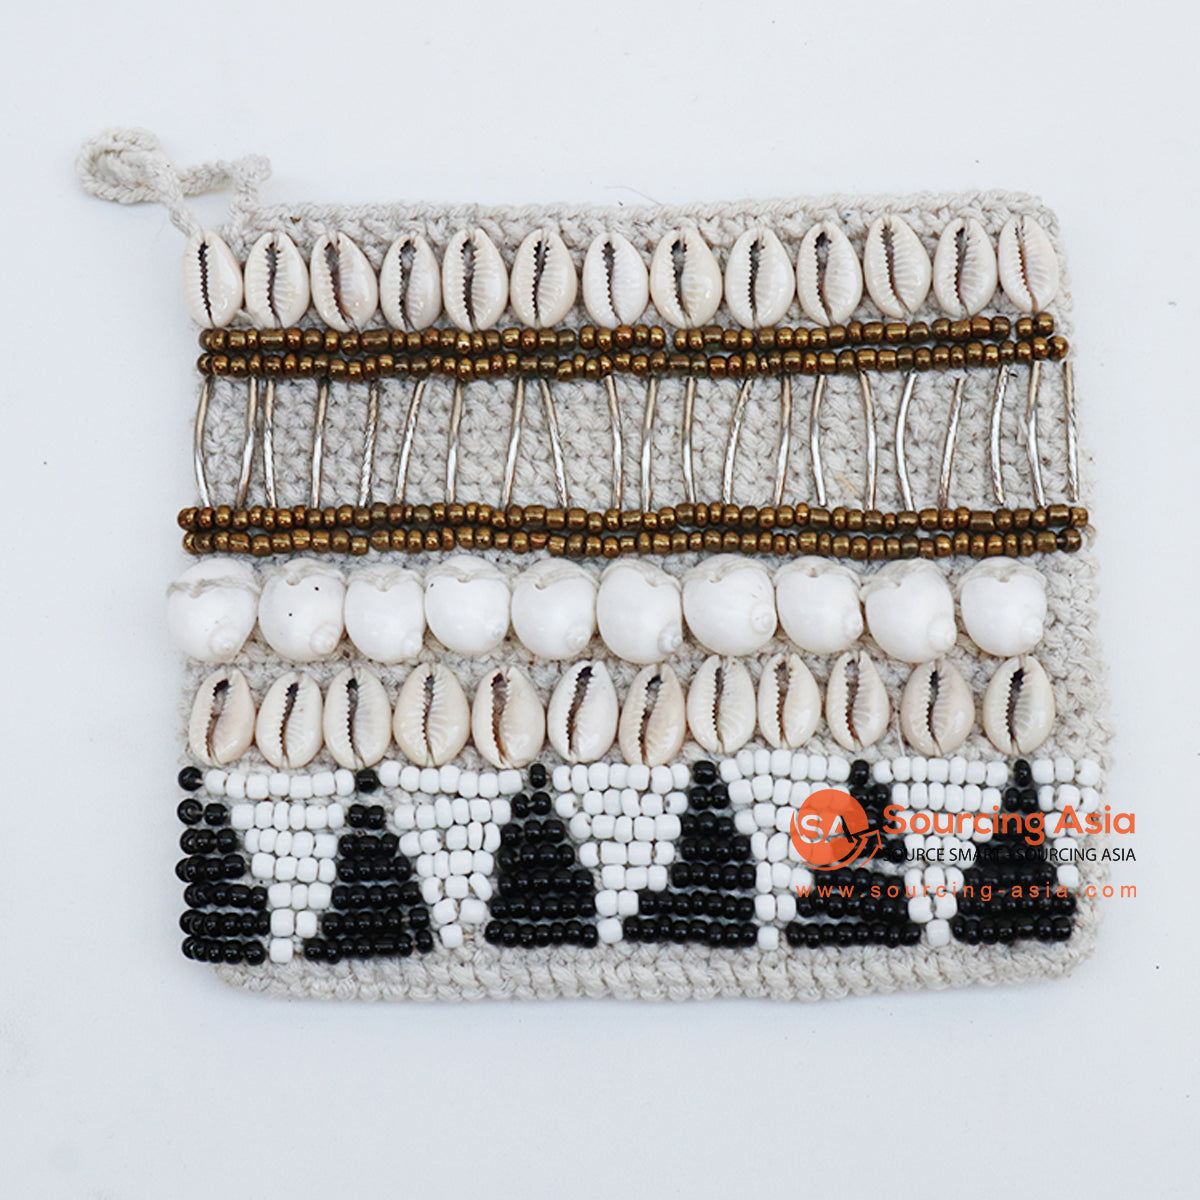 EXAC004-4 MULTICOLOR BEADS AND SHELL PATTERNED WHITE MACRAME PURSE